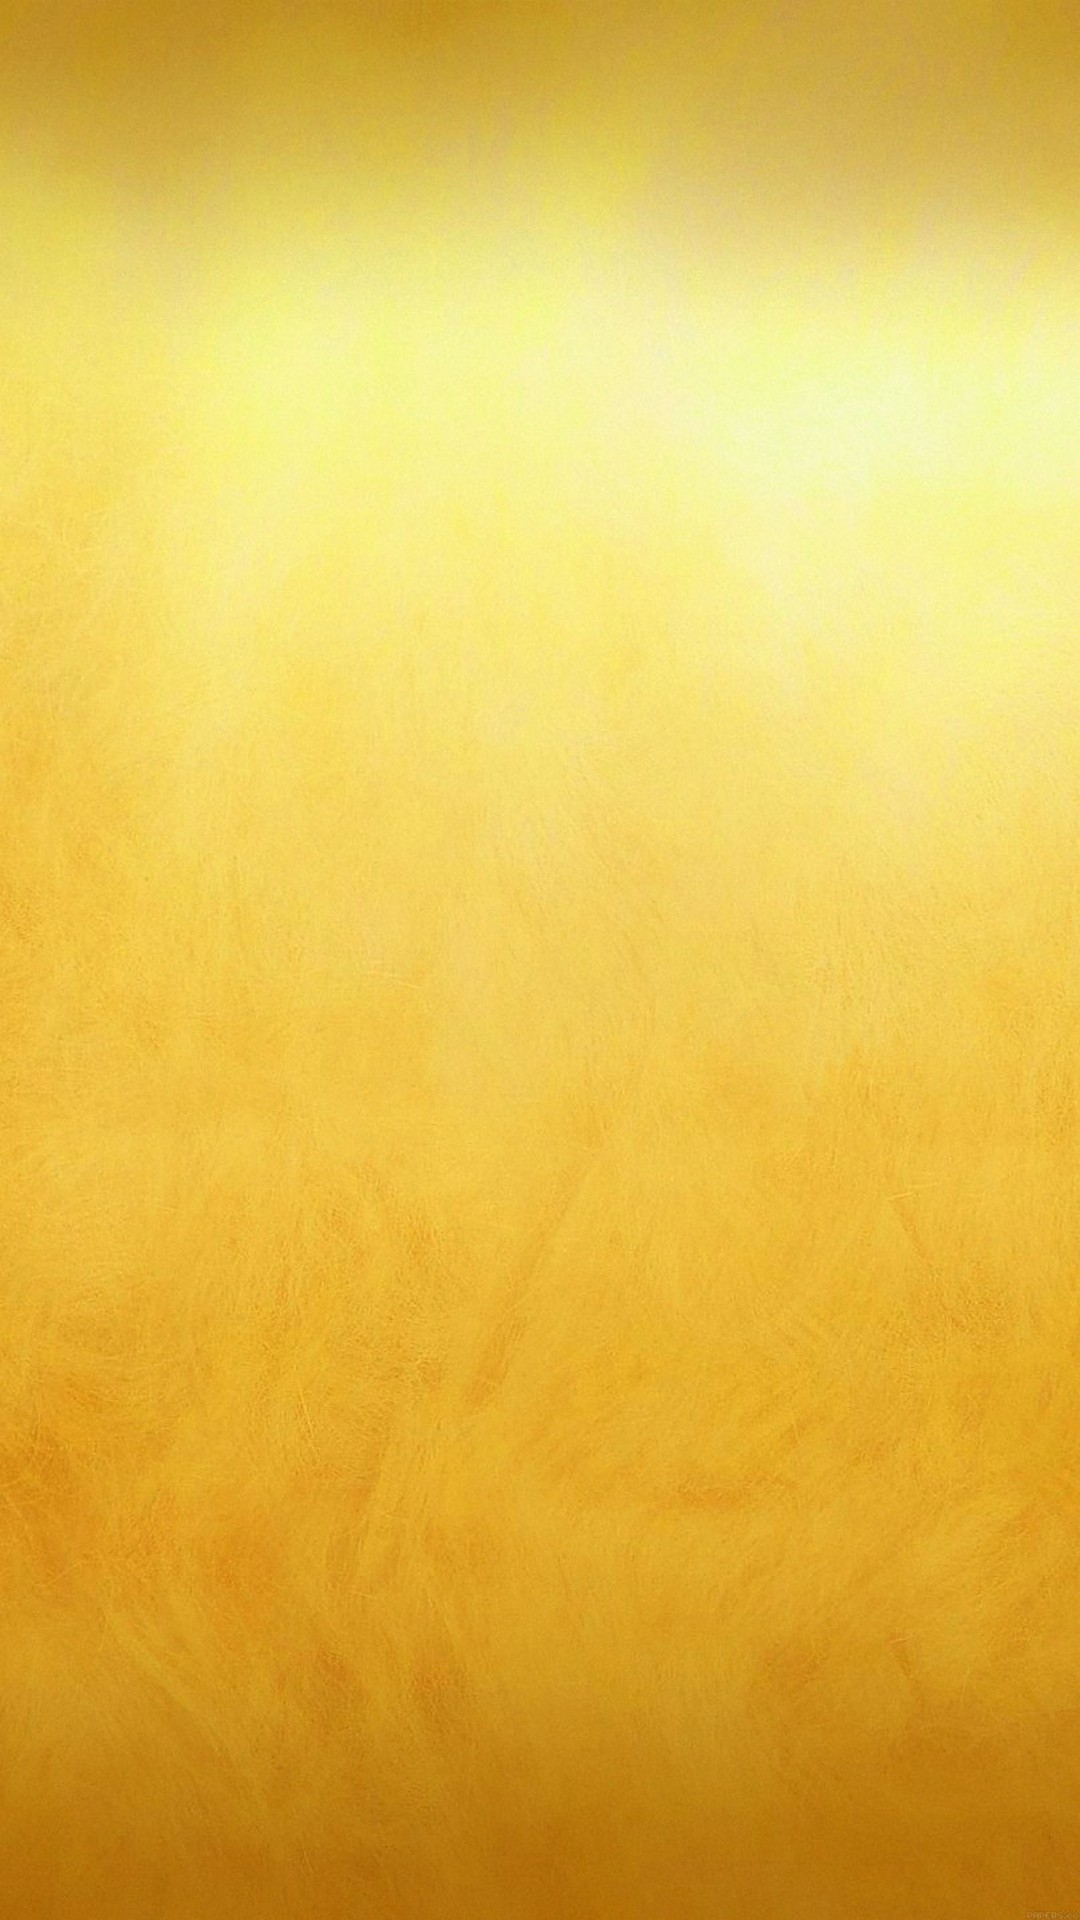 Gold Wallpaper For Android with HD resolution 1080x1920